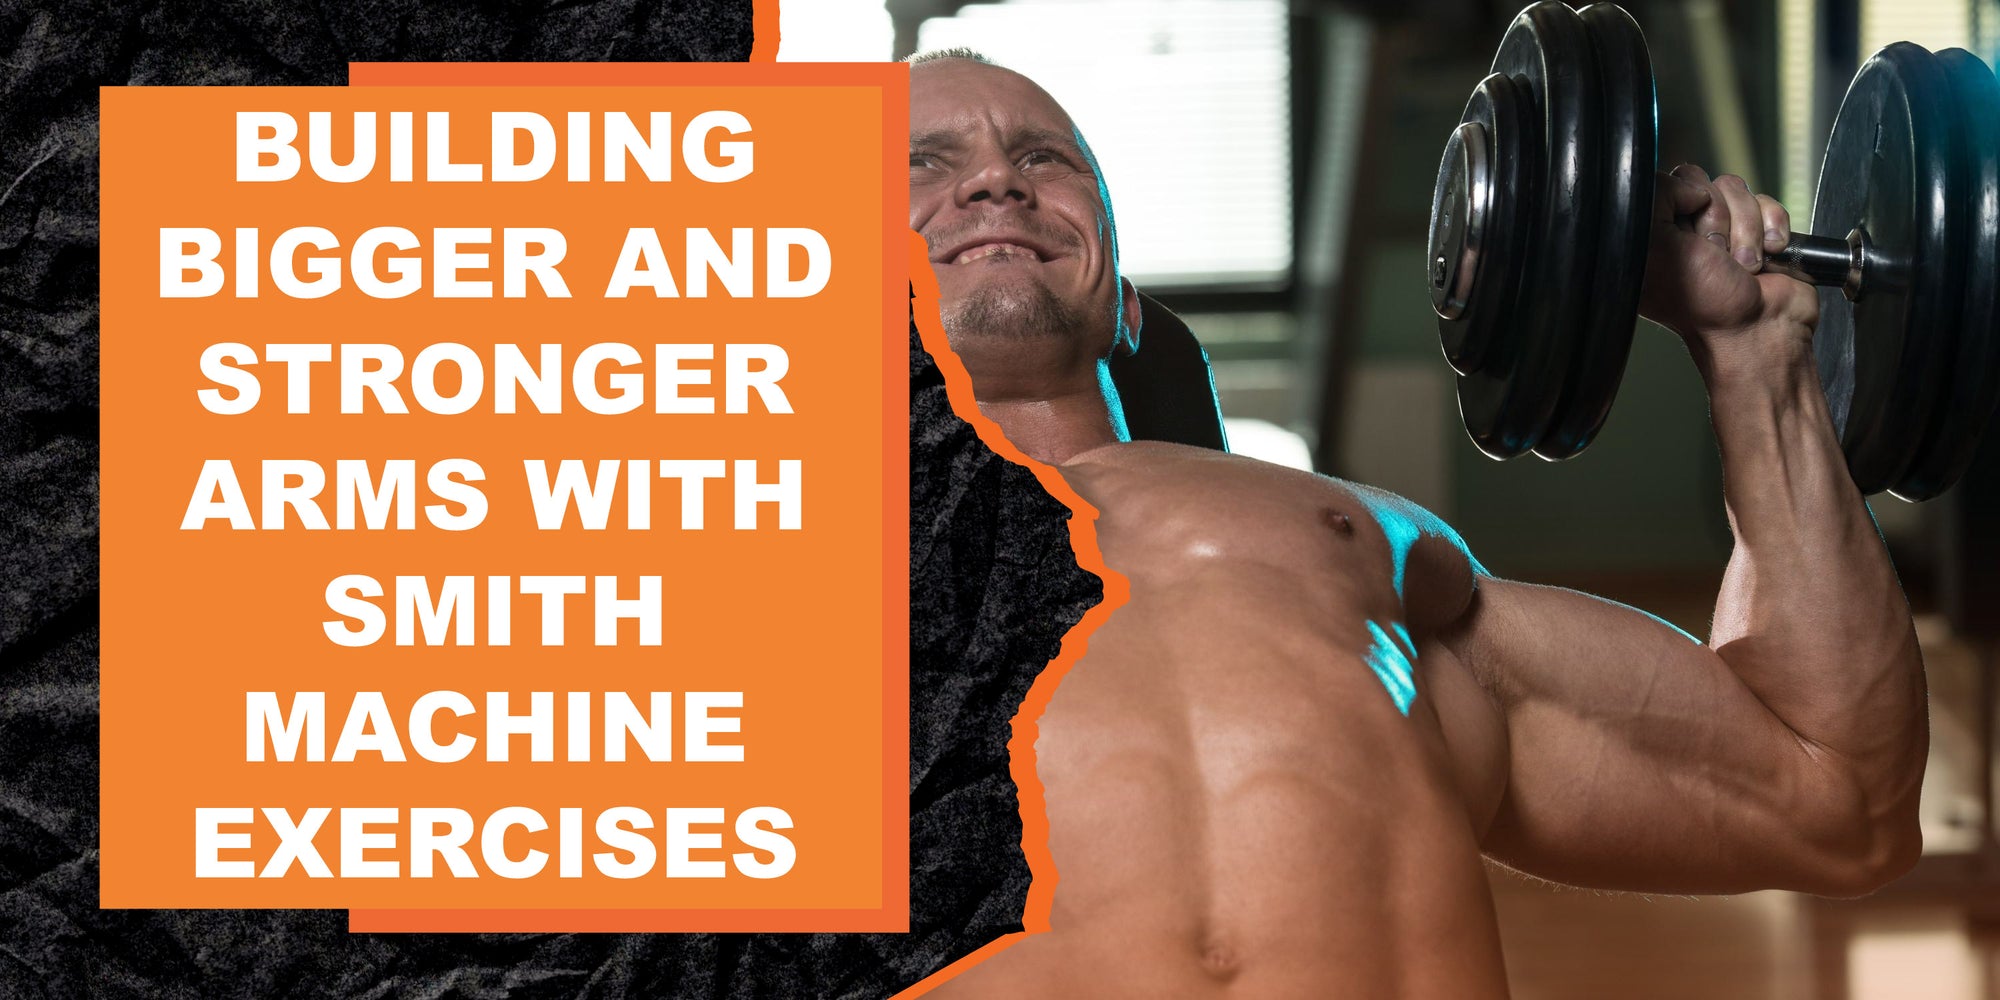 Building Bigger and Stronger Arms with Smith Machine Exercises